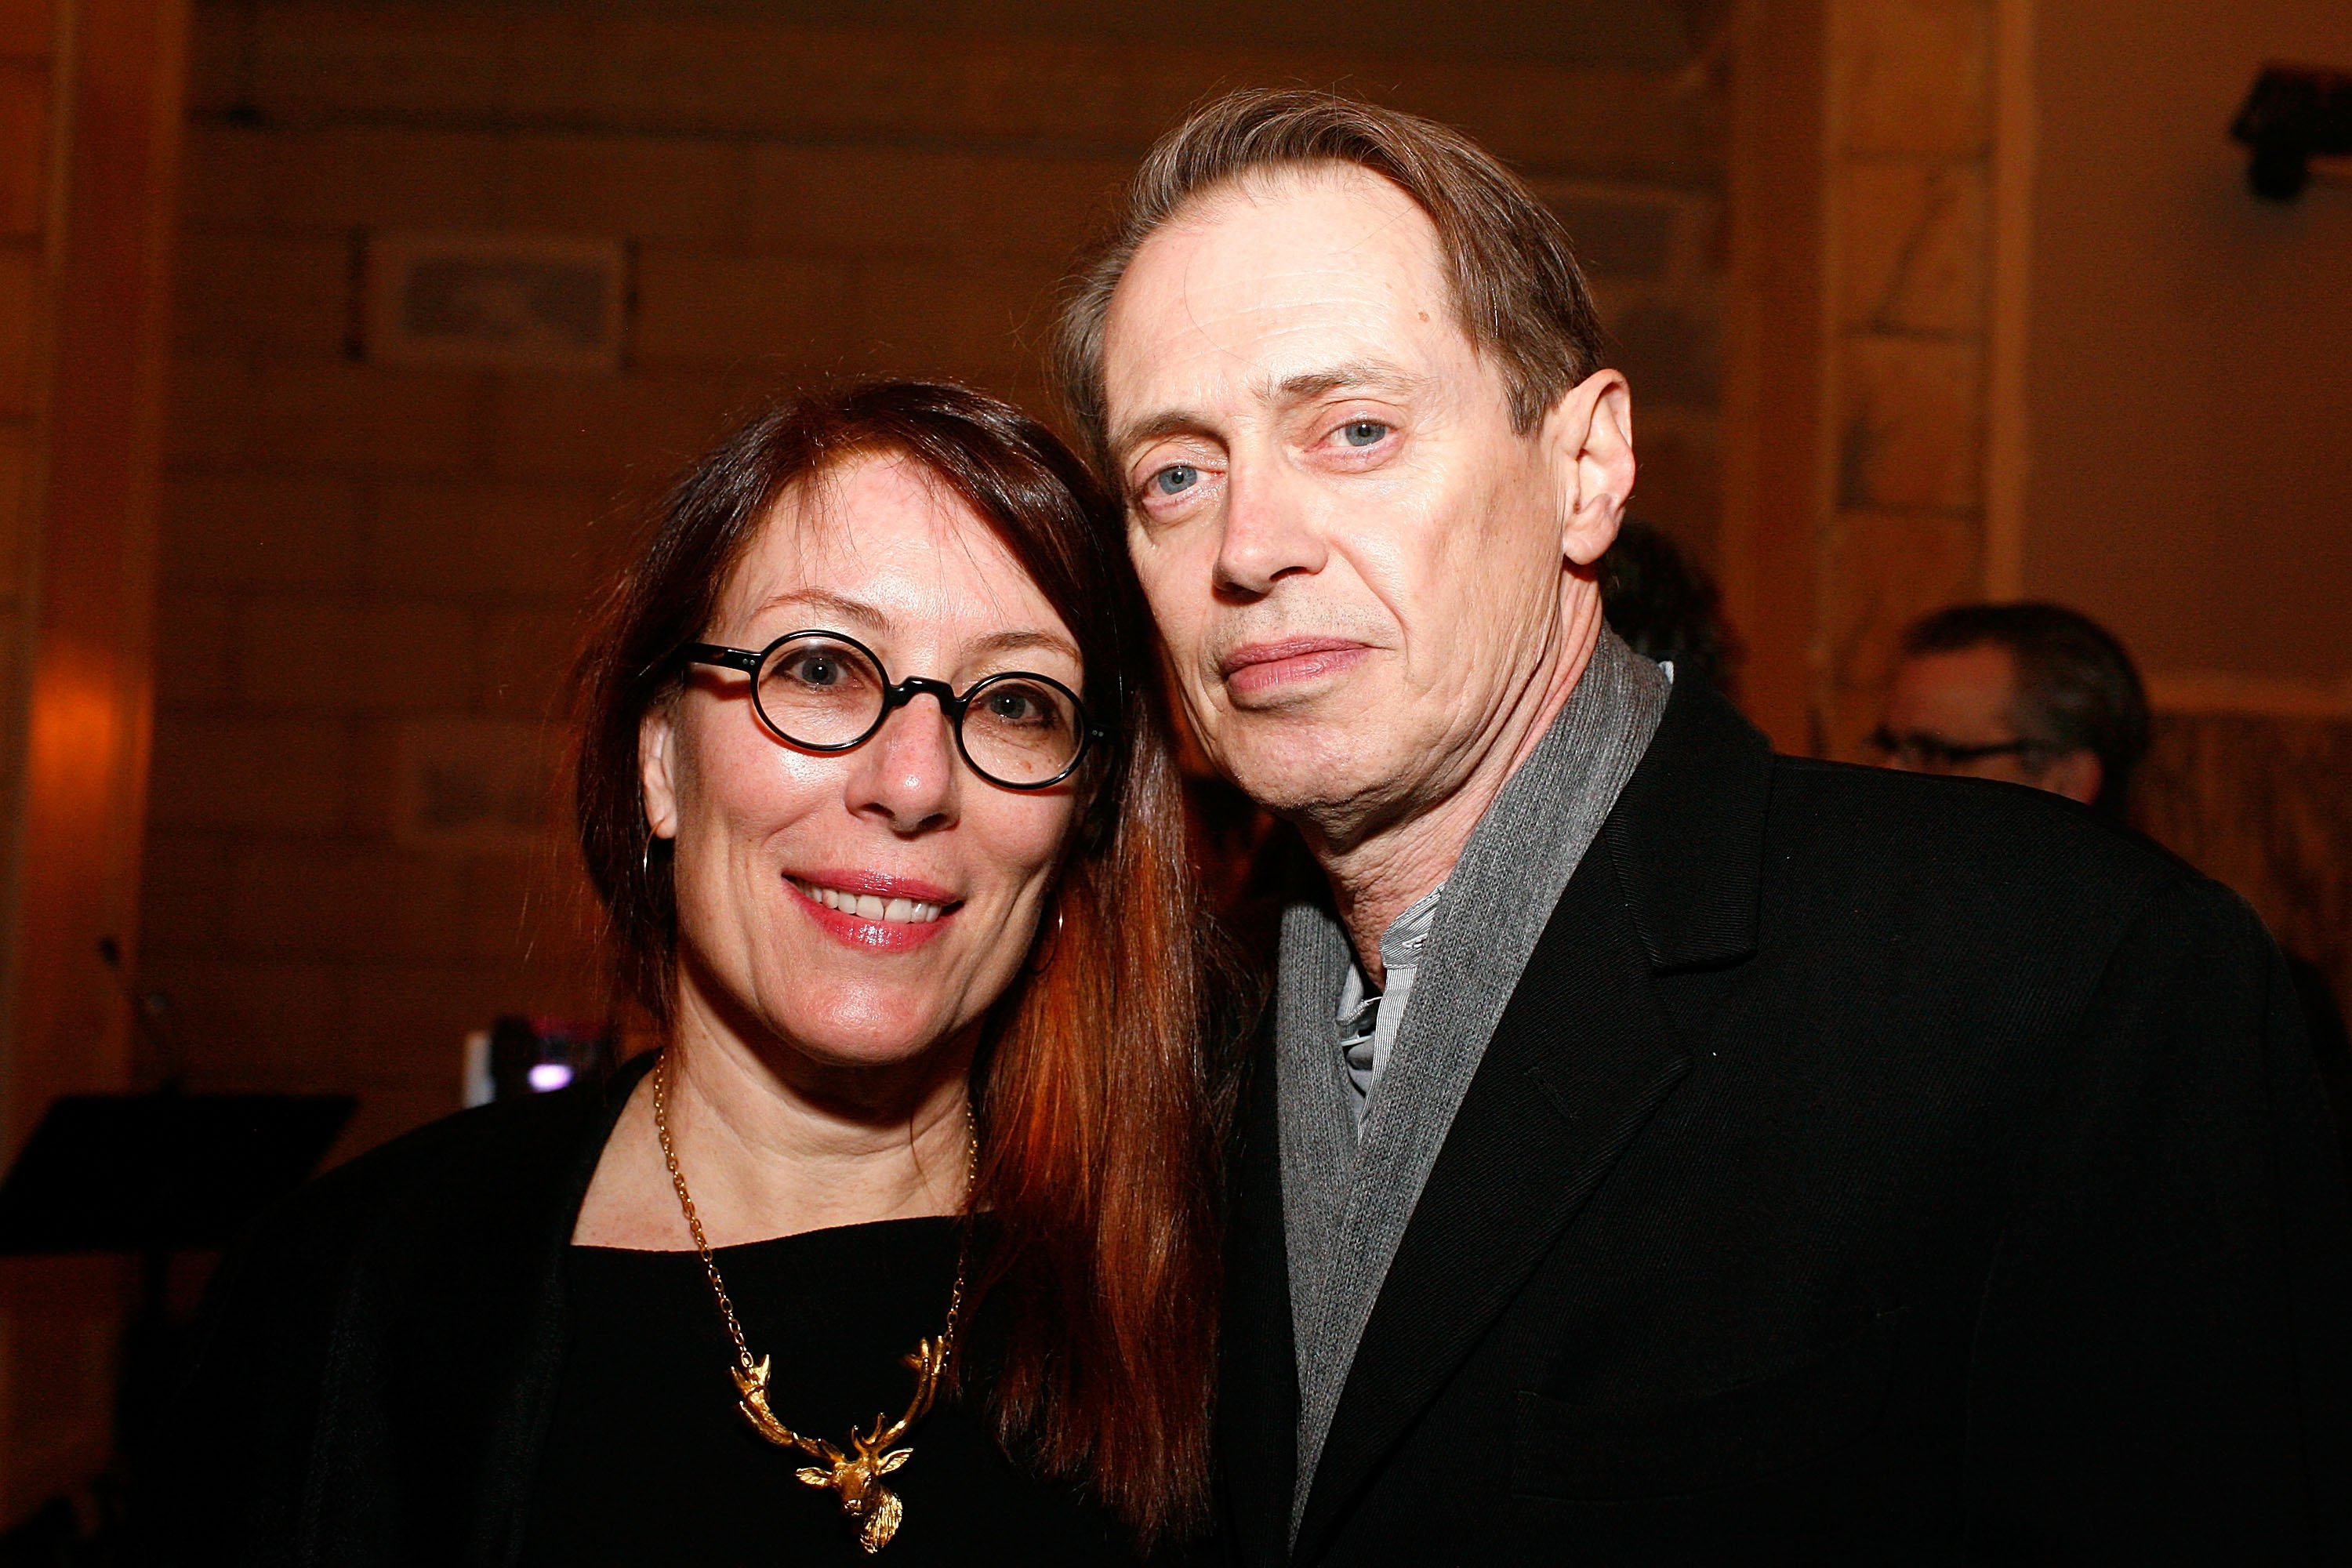 Jo Andres and Steve Buscemi attend the E. Sharp @ 60 Benefit Concert at the ISSUE Project Room on March 4, 2011 in the Brooklyn borough of New York City | Photo: GettyImages